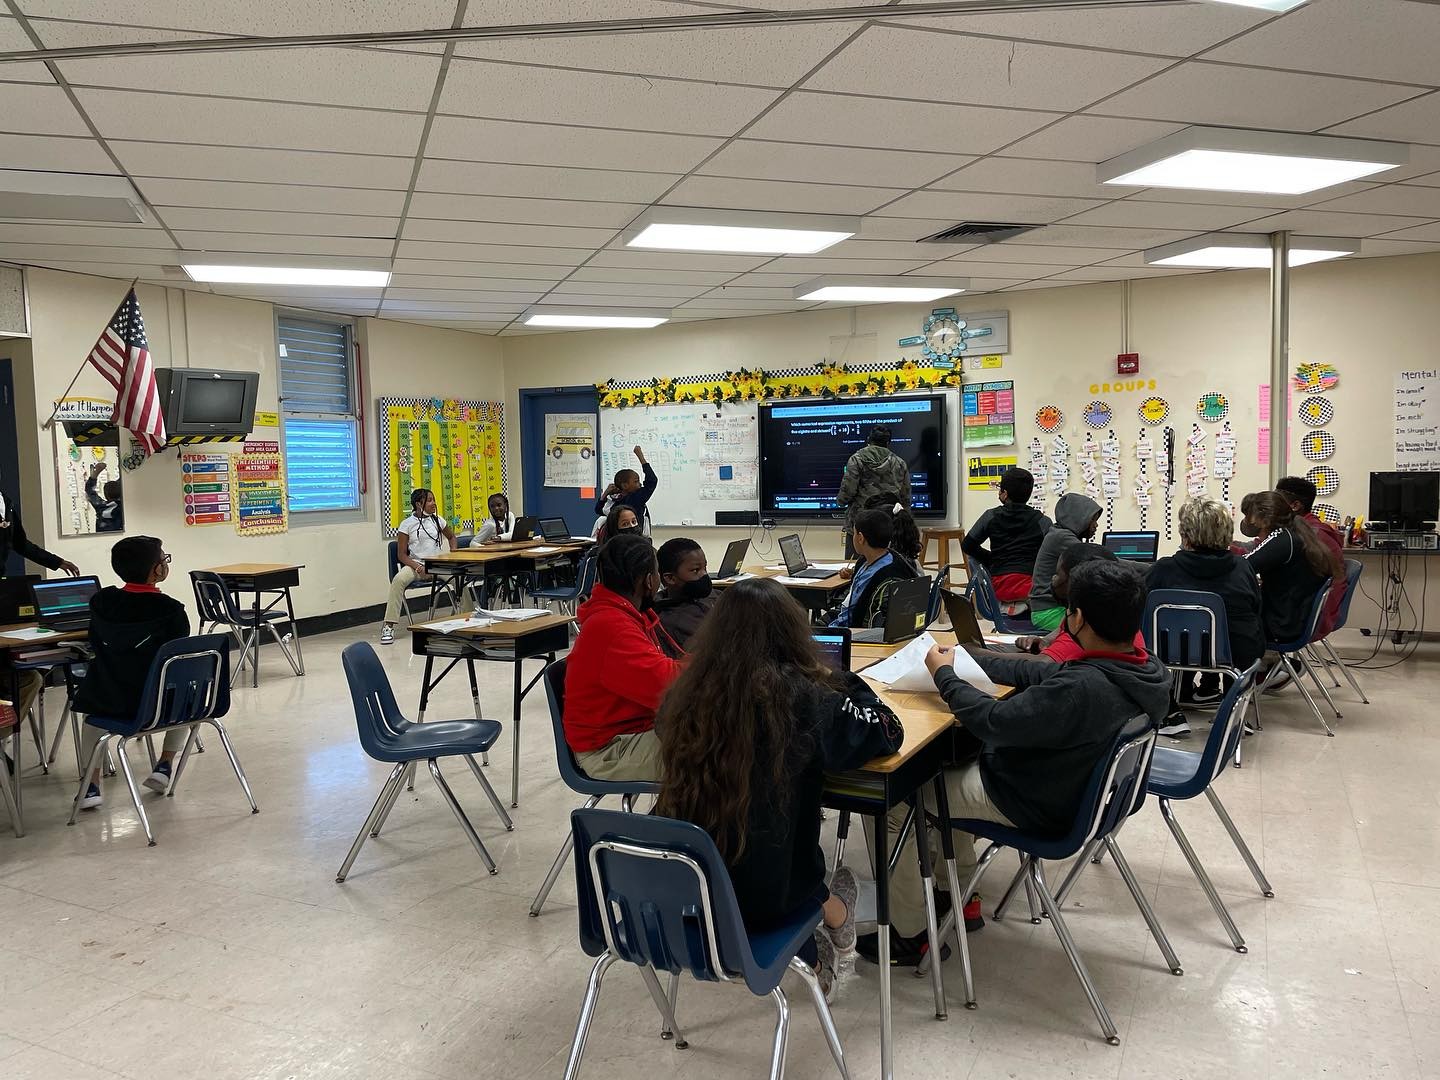 5th grade had a blast collaborating with a partner to review for their topic assessment using Quizizz. Keep working hard mathematicians! 🤩🏅#GoingfortheGoldatKLP #KLProcks @miamisup @mdcpscentralregion @mdcpscommunity @miamischools